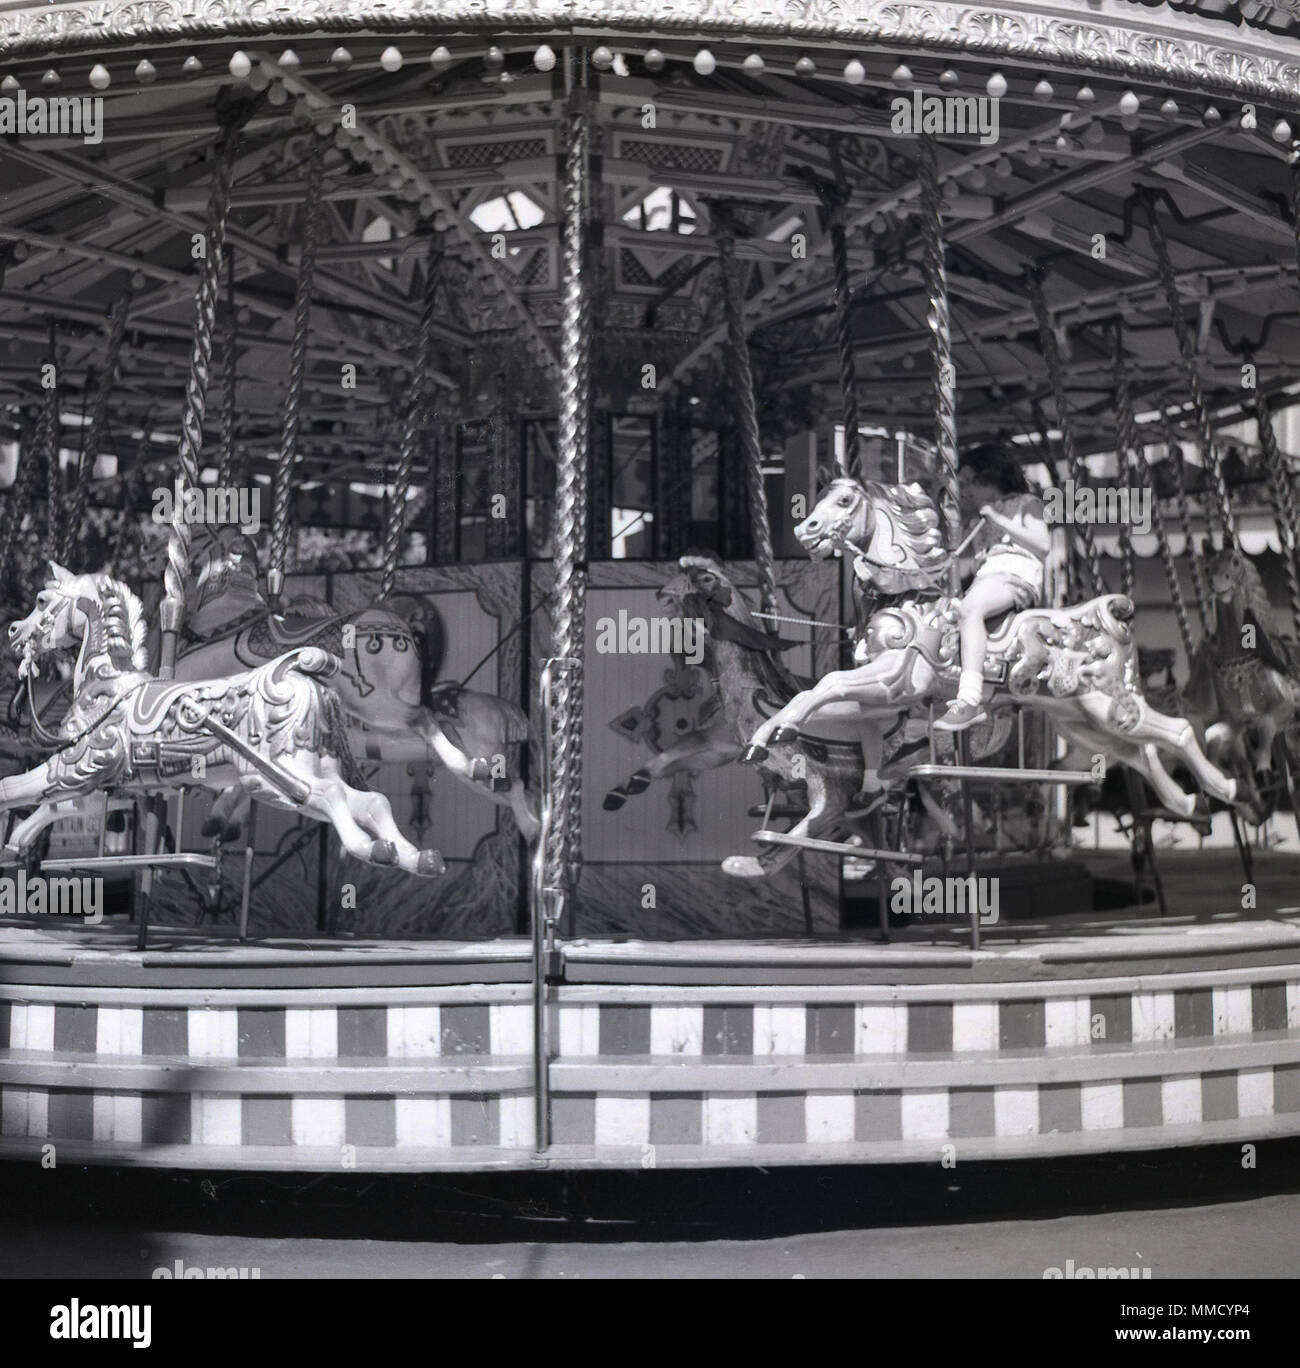 1960s, historical, young girl riding a wooden horse on a carousel or merry-go-round at the fun fair at Battersea Park, London, England, UK. The fairground was built for the 1951 Festival of Britain celebrations in the nothern section of the park and was a major attractions for many years. Stock Photo